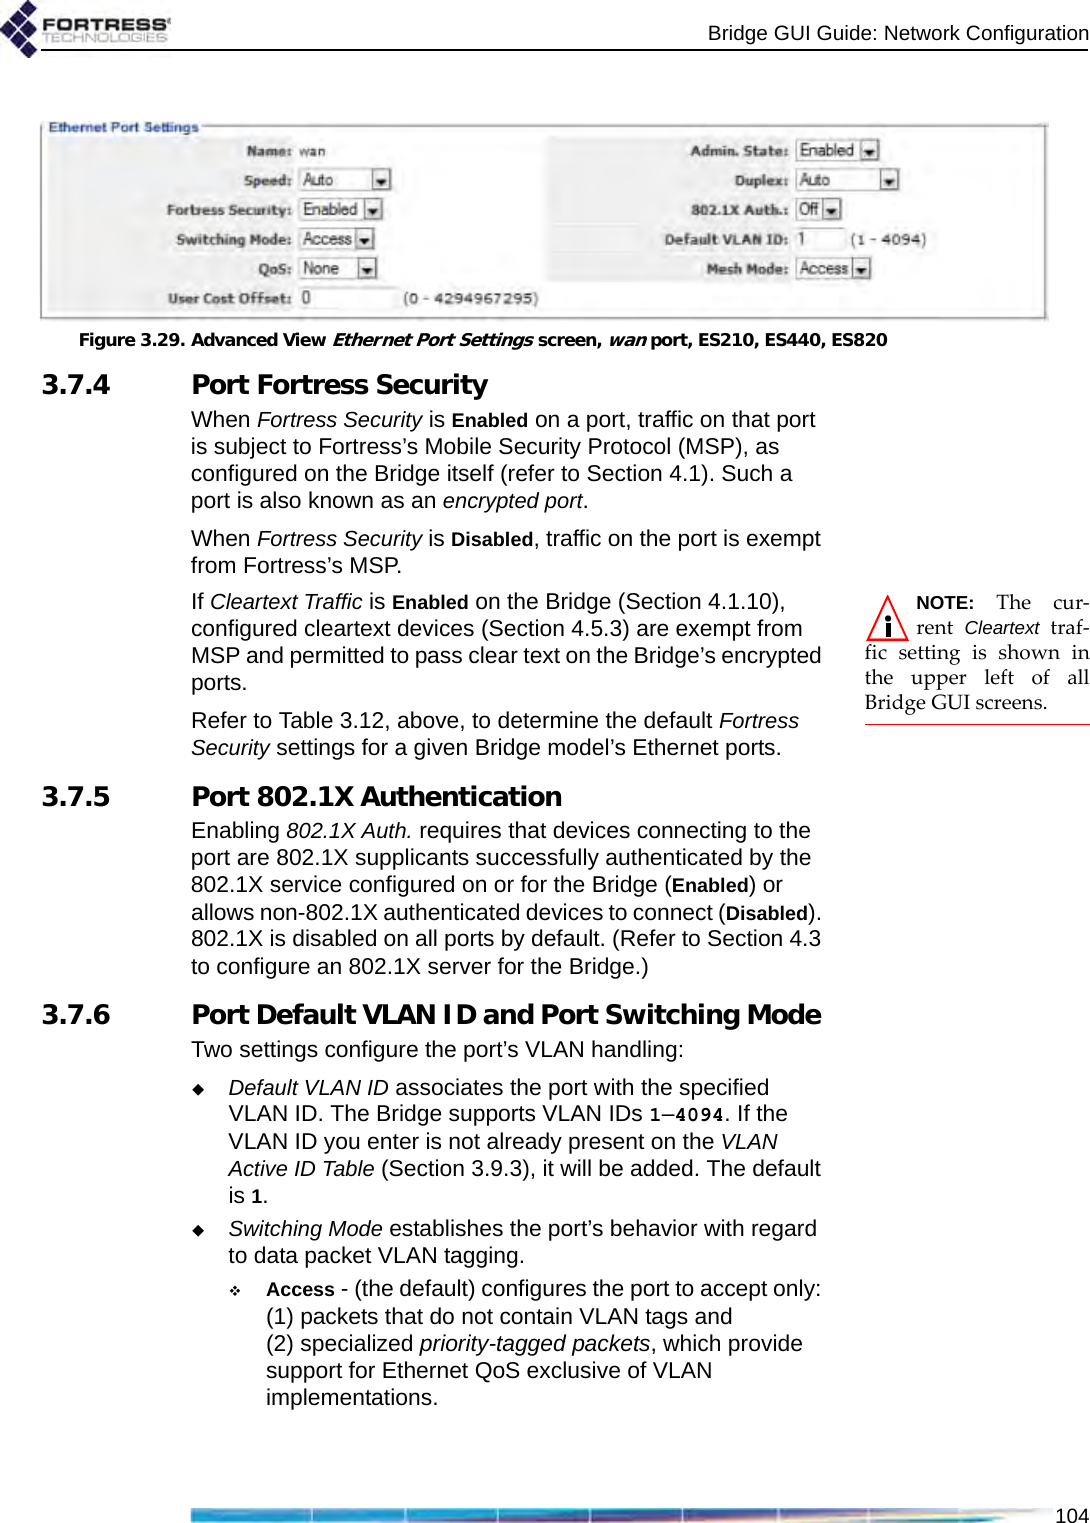 Bridge GUI Guide: Network Configuration104Figure 3.29. Advanced View Ethernet Port Settings screen, wan port, ES210, ES440, ES8203.7.4 Port Fortress SecurityWhen Fortress Security is Enabled on a port, traffic on that port is subject to Fortress’s Mobile Security Protocol (MSP), as configured on the Bridge itself (refer to Section 4.1). Such a port is also known as an encrypted port.When Fortress Security is Disabled, traffic on the port is exempt from Fortress’s MSP.NOTE: The cur-rent  Cleartext traf-fic setting is shown inthe upper left of allBridge GUI screens.If Cleartext Traffic is Enabled on the Bridge (Section 4.1.10), configured cleartext devices (Section 4.5.3) are exempt from MSP and permitted to pass clear text on the Bridge’s encrypted ports.Refer to Table 3.12, above, to determine the default Fortress Security settings for a given Bridge model’s Ethernet ports.3.7.5 Port 802.1X AuthenticationEnabling 802.1X Auth. requires that devices connecting to the port are 802.1X supplicants successfully authenticated by the 802.1X service configured on or for the Bridge (Enabled) or allows non-802.1X authenticated devices to connect (Disabled). 802.1X is disabled on all ports by default. (Refer to Section 4.3 to configure an 802.1X server for the Bridge.)3.7.6 Port Default VLAN ID and Port Switching Mode Two settings configure the port’s VLAN handling:Default VLAN ID associates the port with the specified VLAN ID. The Bridge supports VLAN IDs 1–4094. If the VLAN ID you enter is not already present on the VLAN Active ID Table (Section 3.9.3), it will be added. The default is 1.Switching Mode establishes the port’s behavior with regard to data packet VLAN tagging.Access - (the default) configures the port to accept only: (1) packets that do not contain VLAN tags and (2) specialized priority-tagged packets, which provide support for Ethernet QoS exclusive of VLAN implementations.